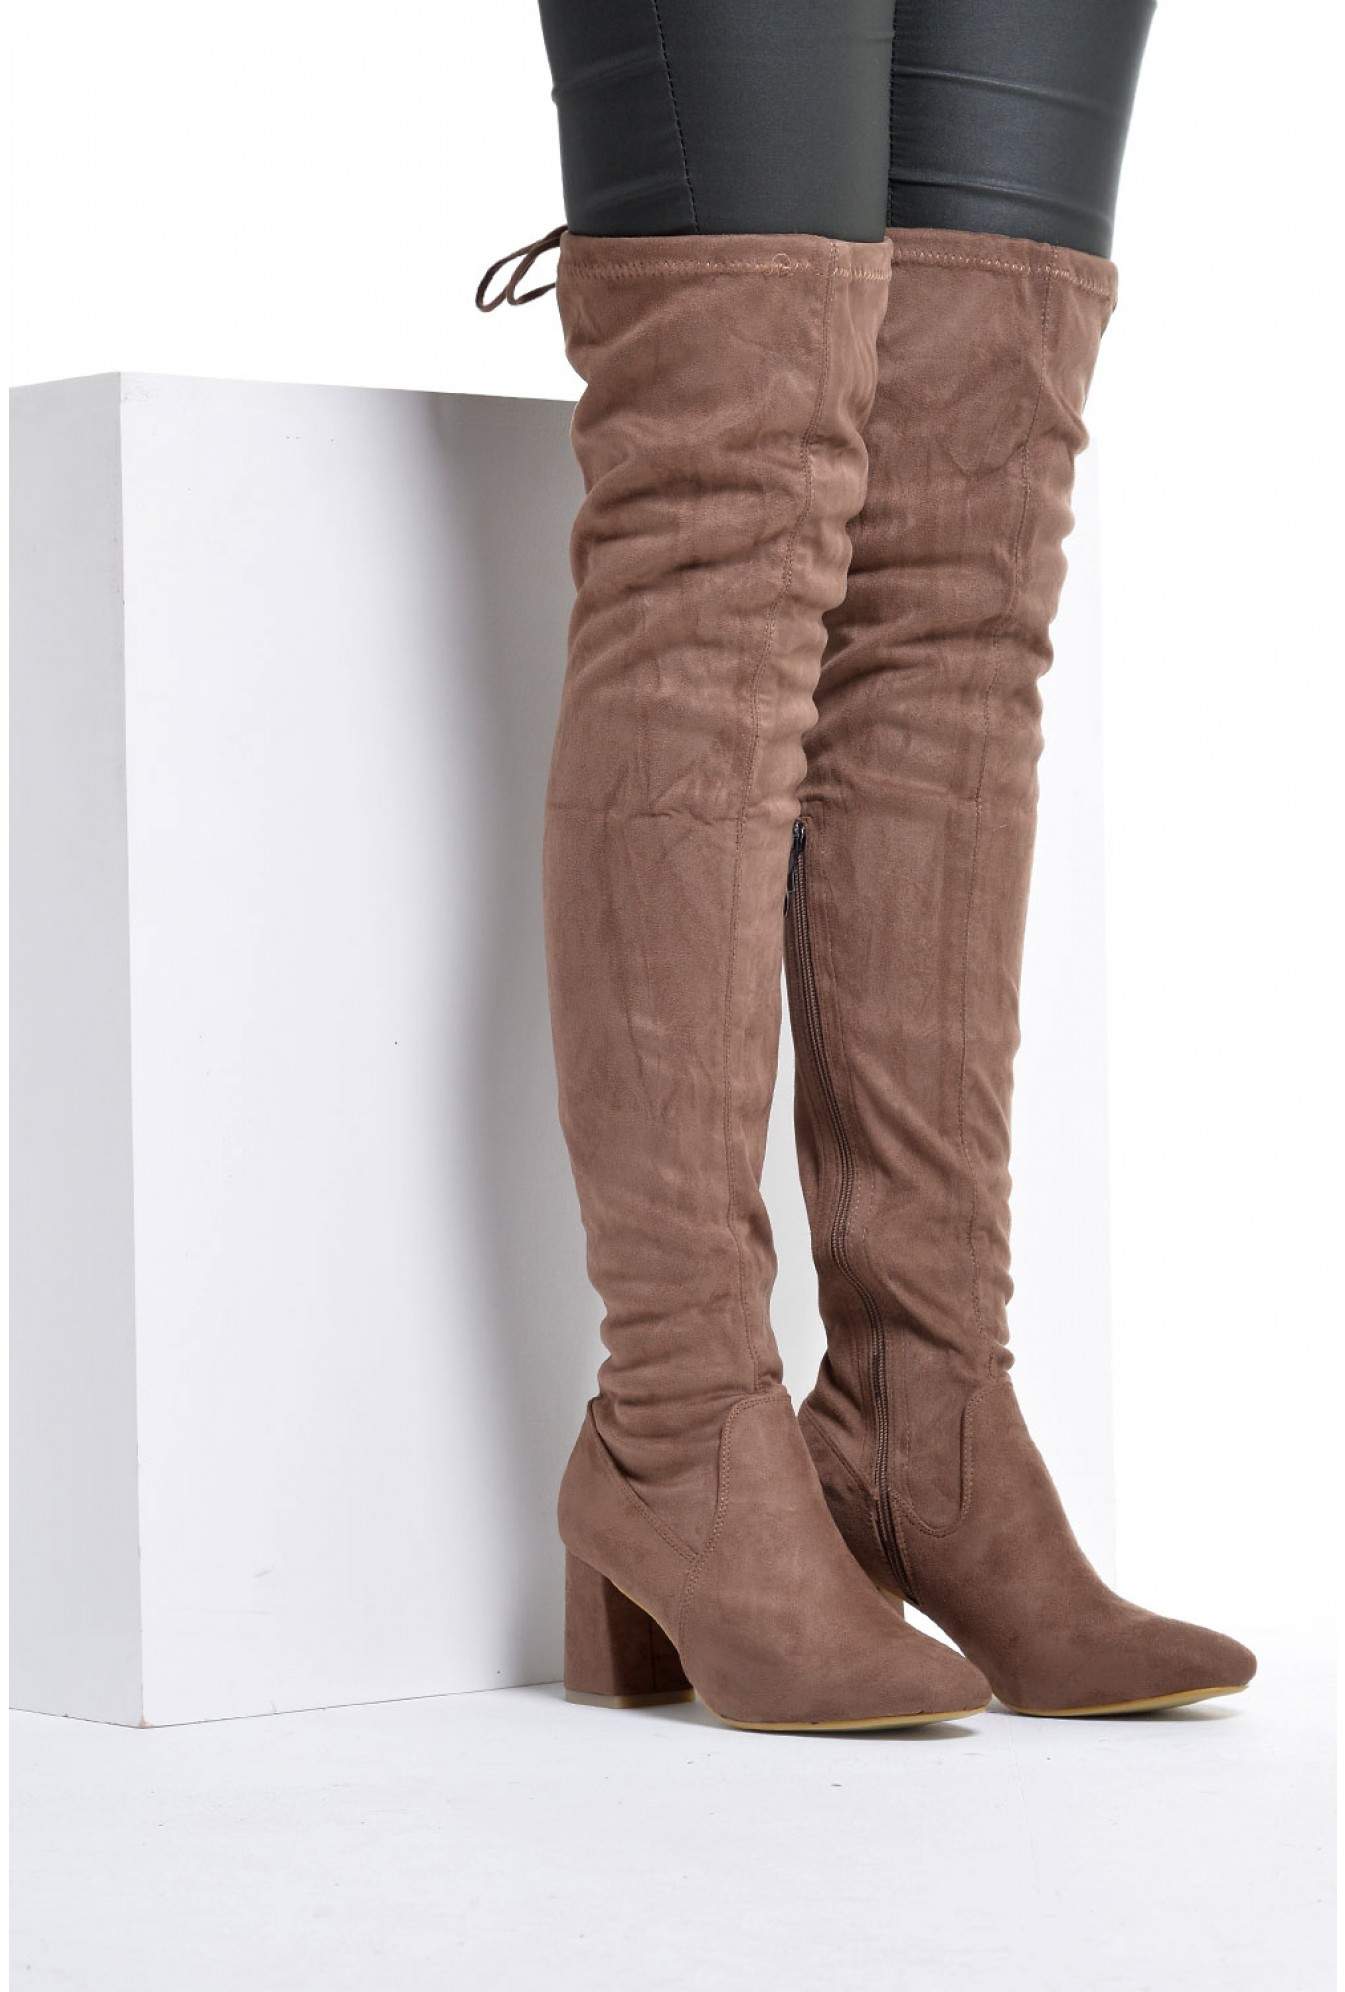 No Doubt Wendy Over The Knee Sock Boots in Mocha Suede | iCLOTHING1345 x 1992